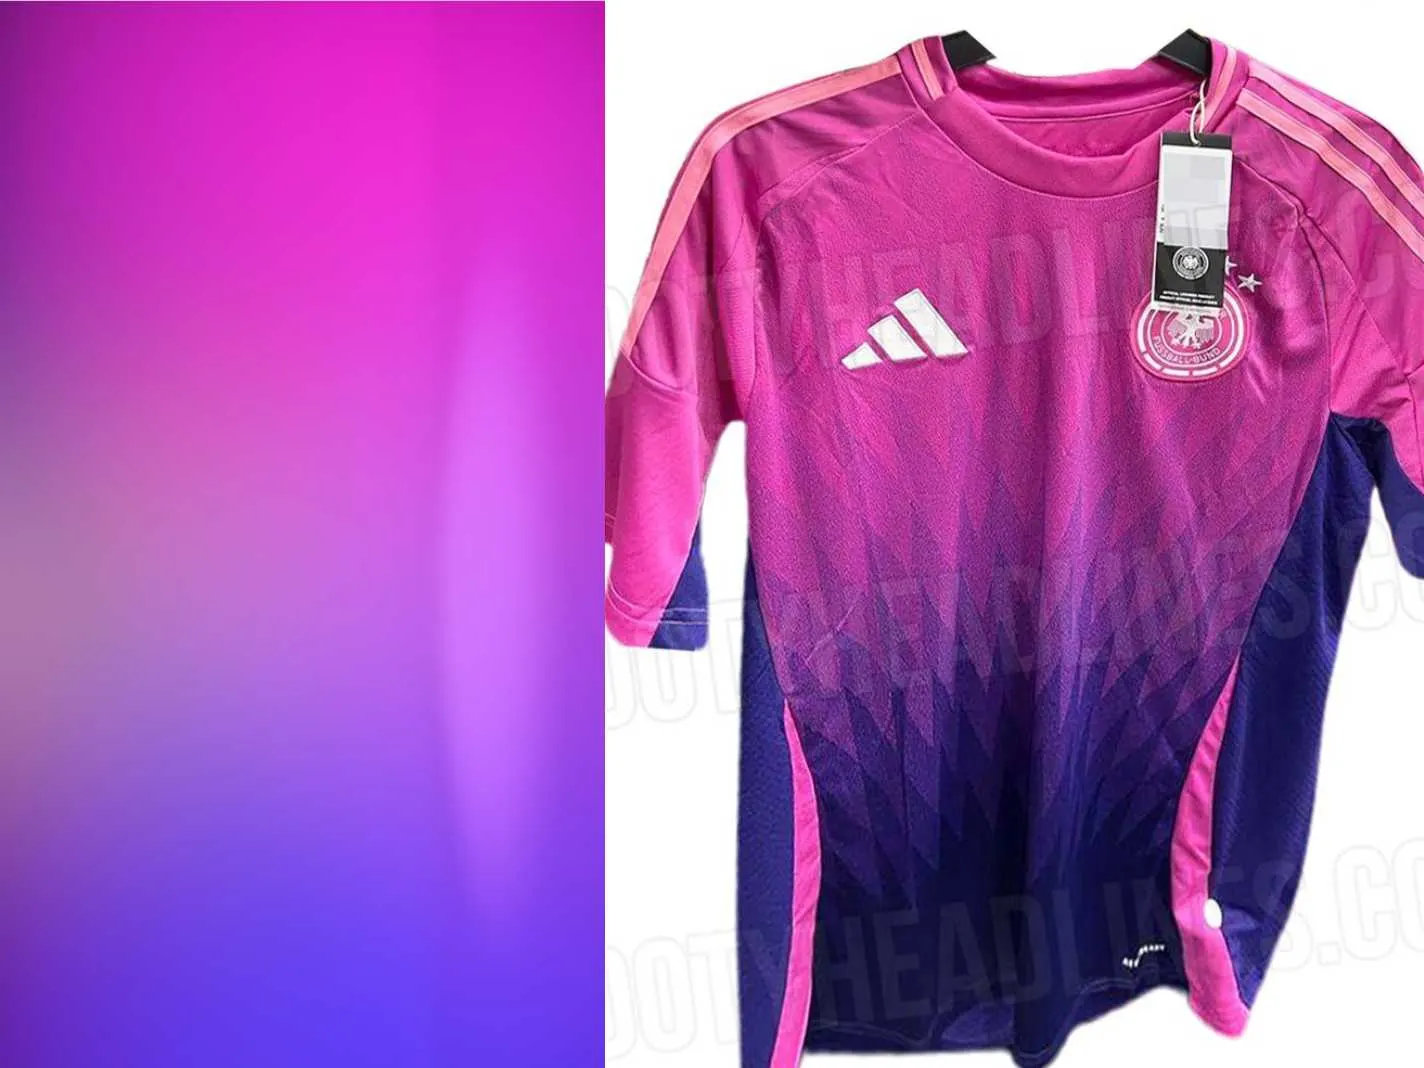 Leaked Germany Away Kit for Euro 24 in pink and purple